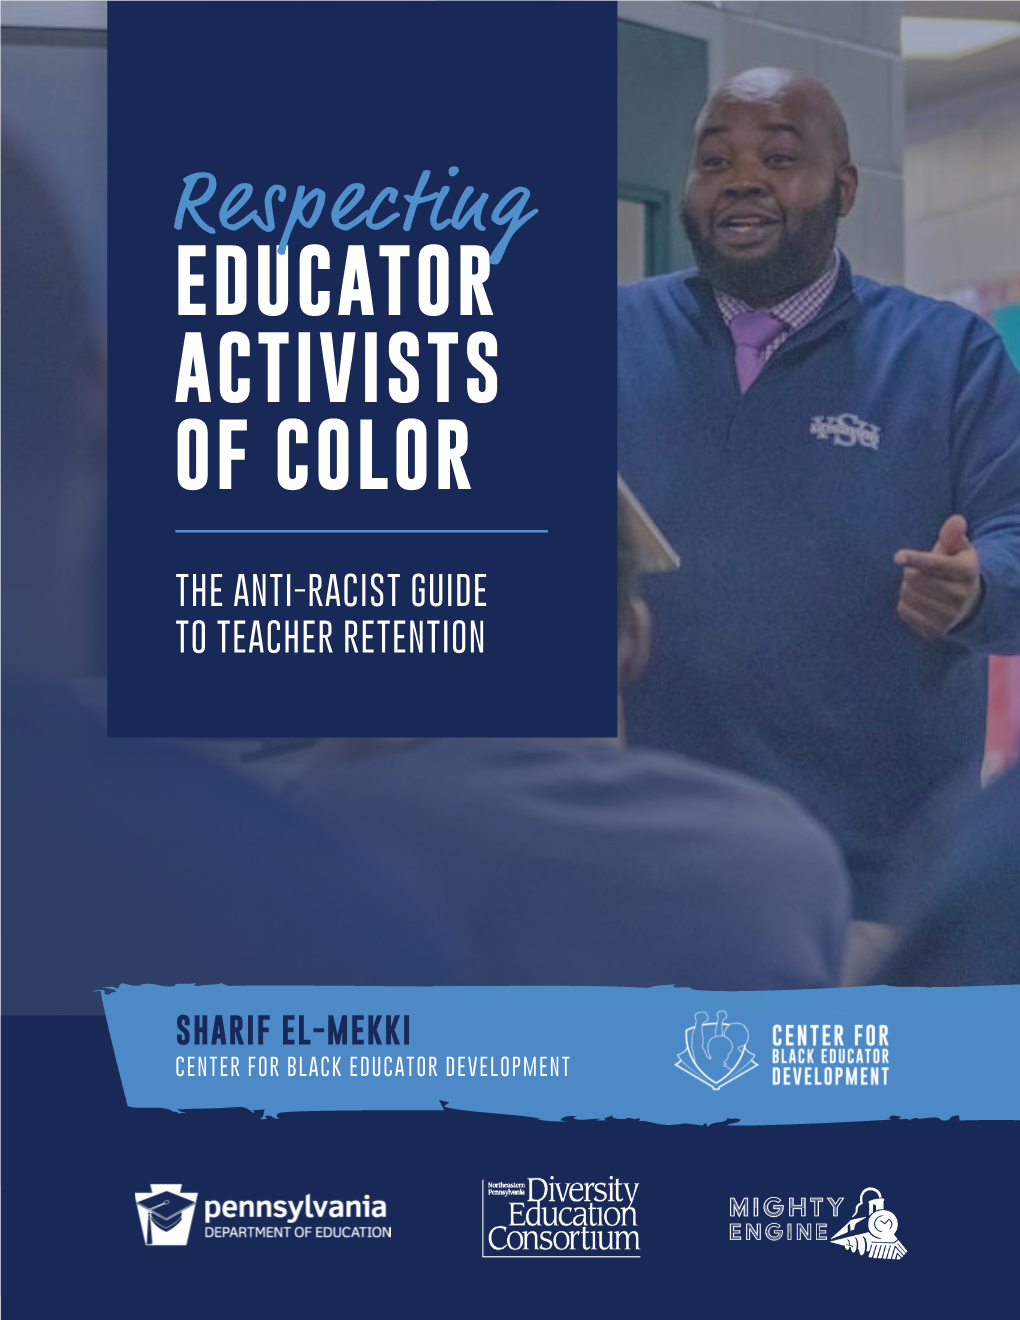 The Anti-Racist Guide to Teacher Retention